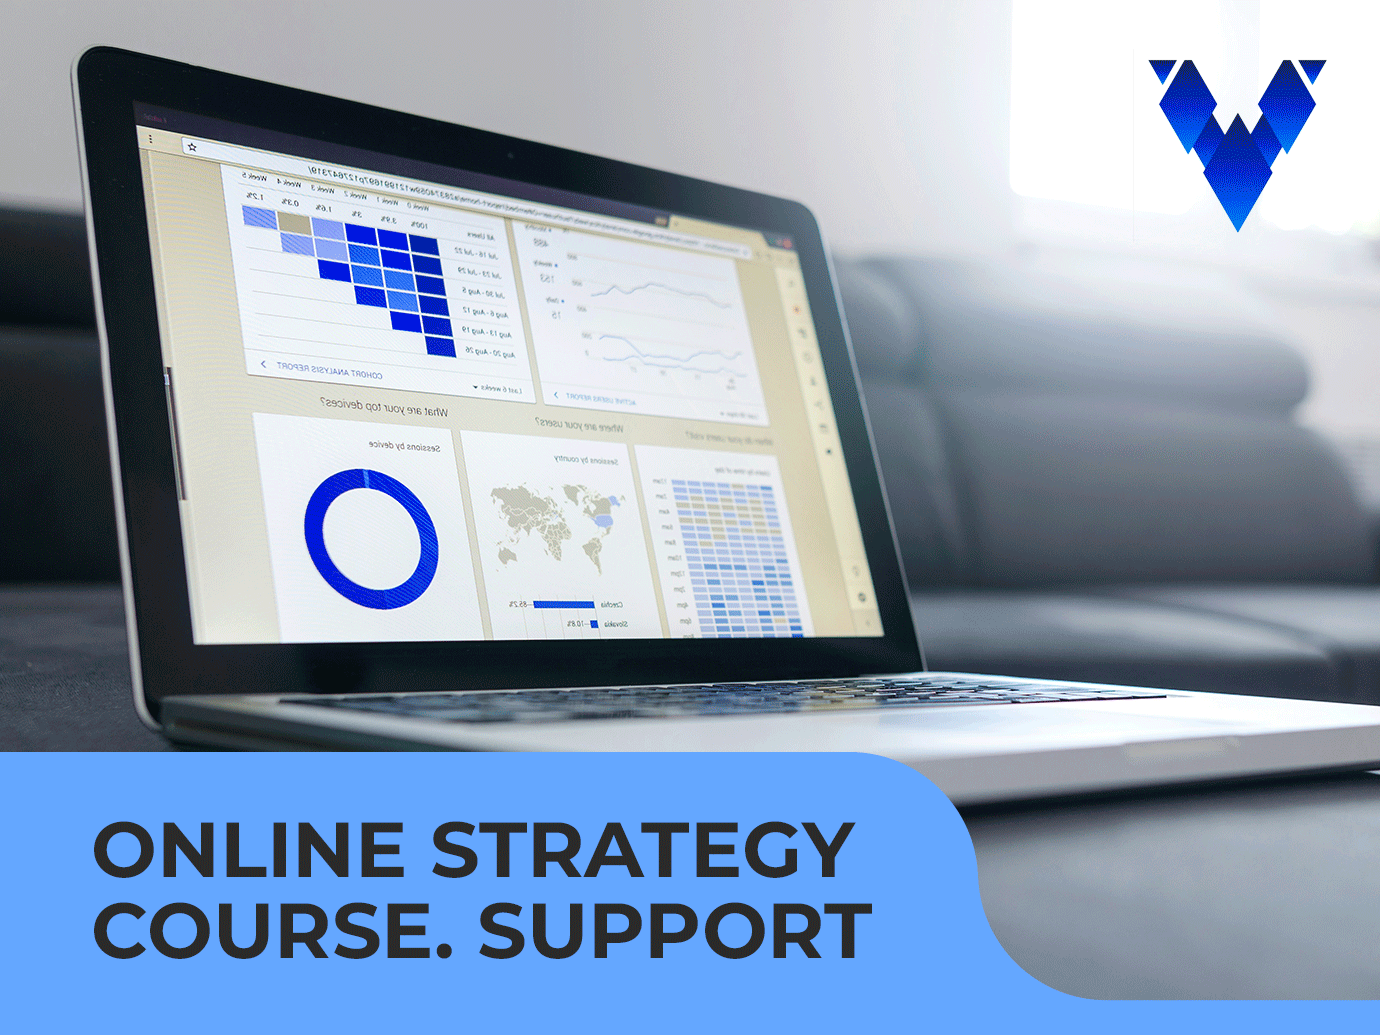 Online Strategy course. Support.